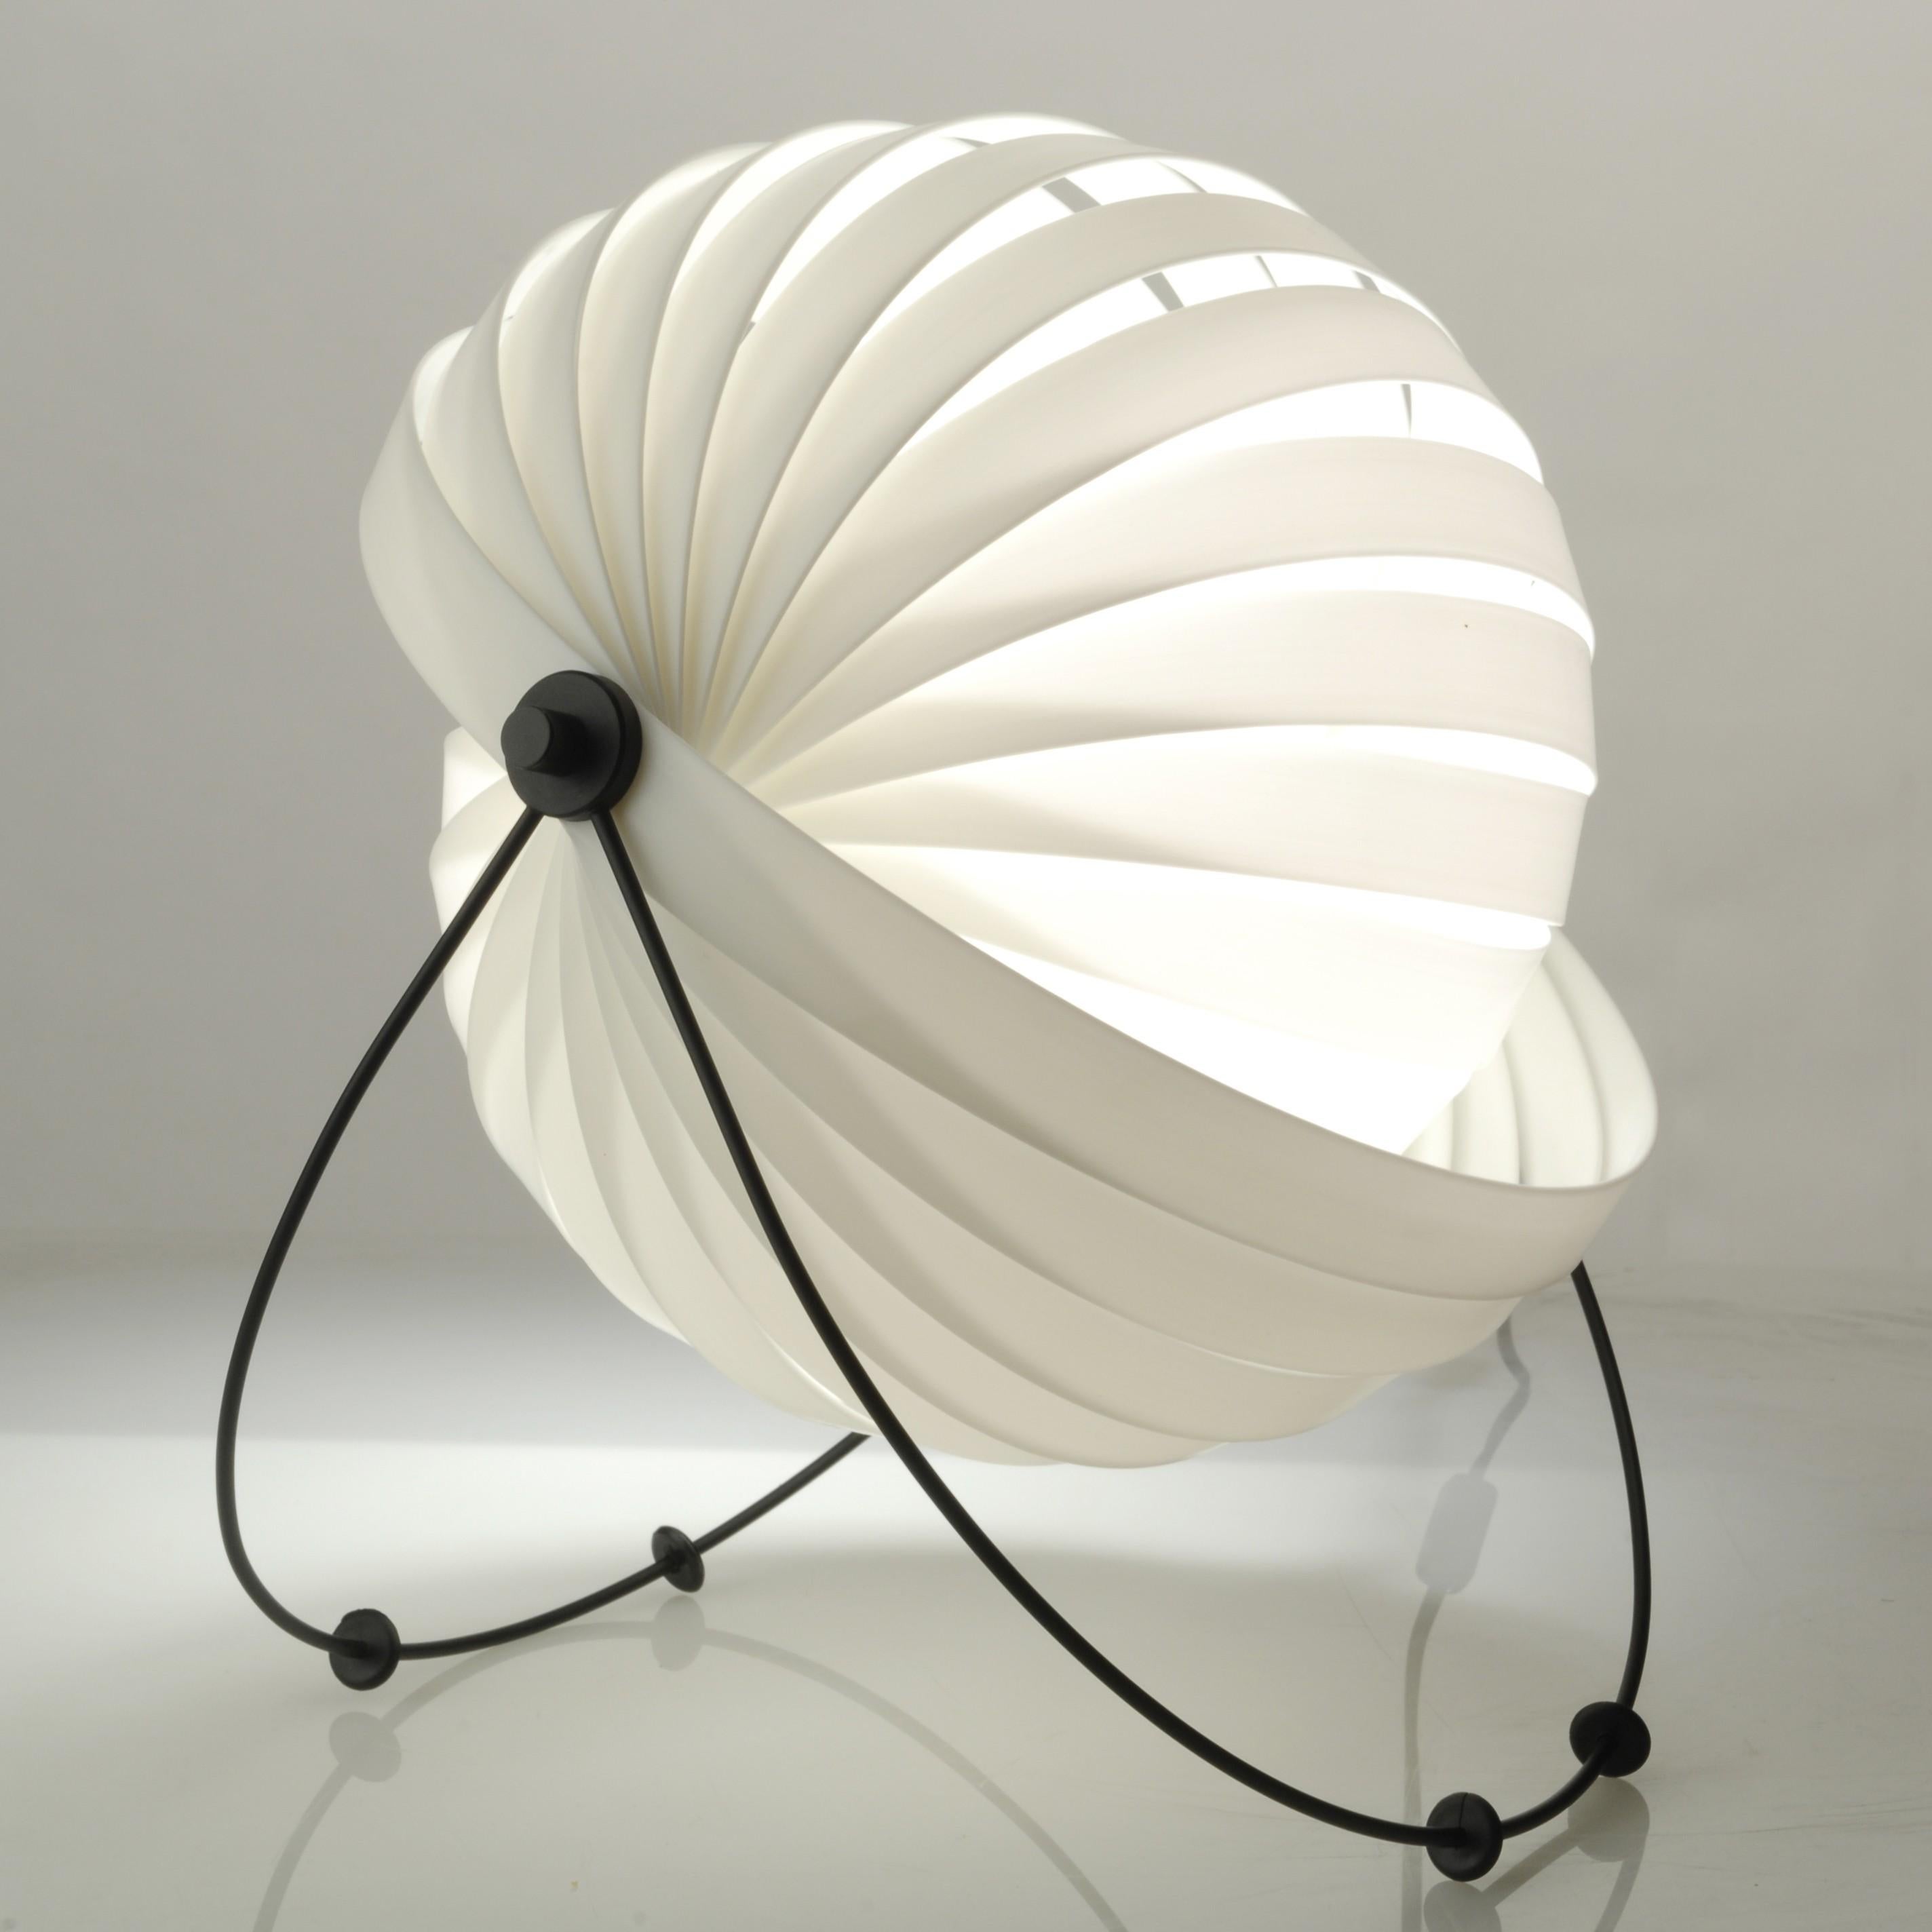 Sculptural eclipse model table lamp. with a snail-shaped dome made of a single spiral-mounted blade and painted iron feet. Vintage piece, 1980s. In working order.

About the Eclipse lamp, Maurício Klabin said: 